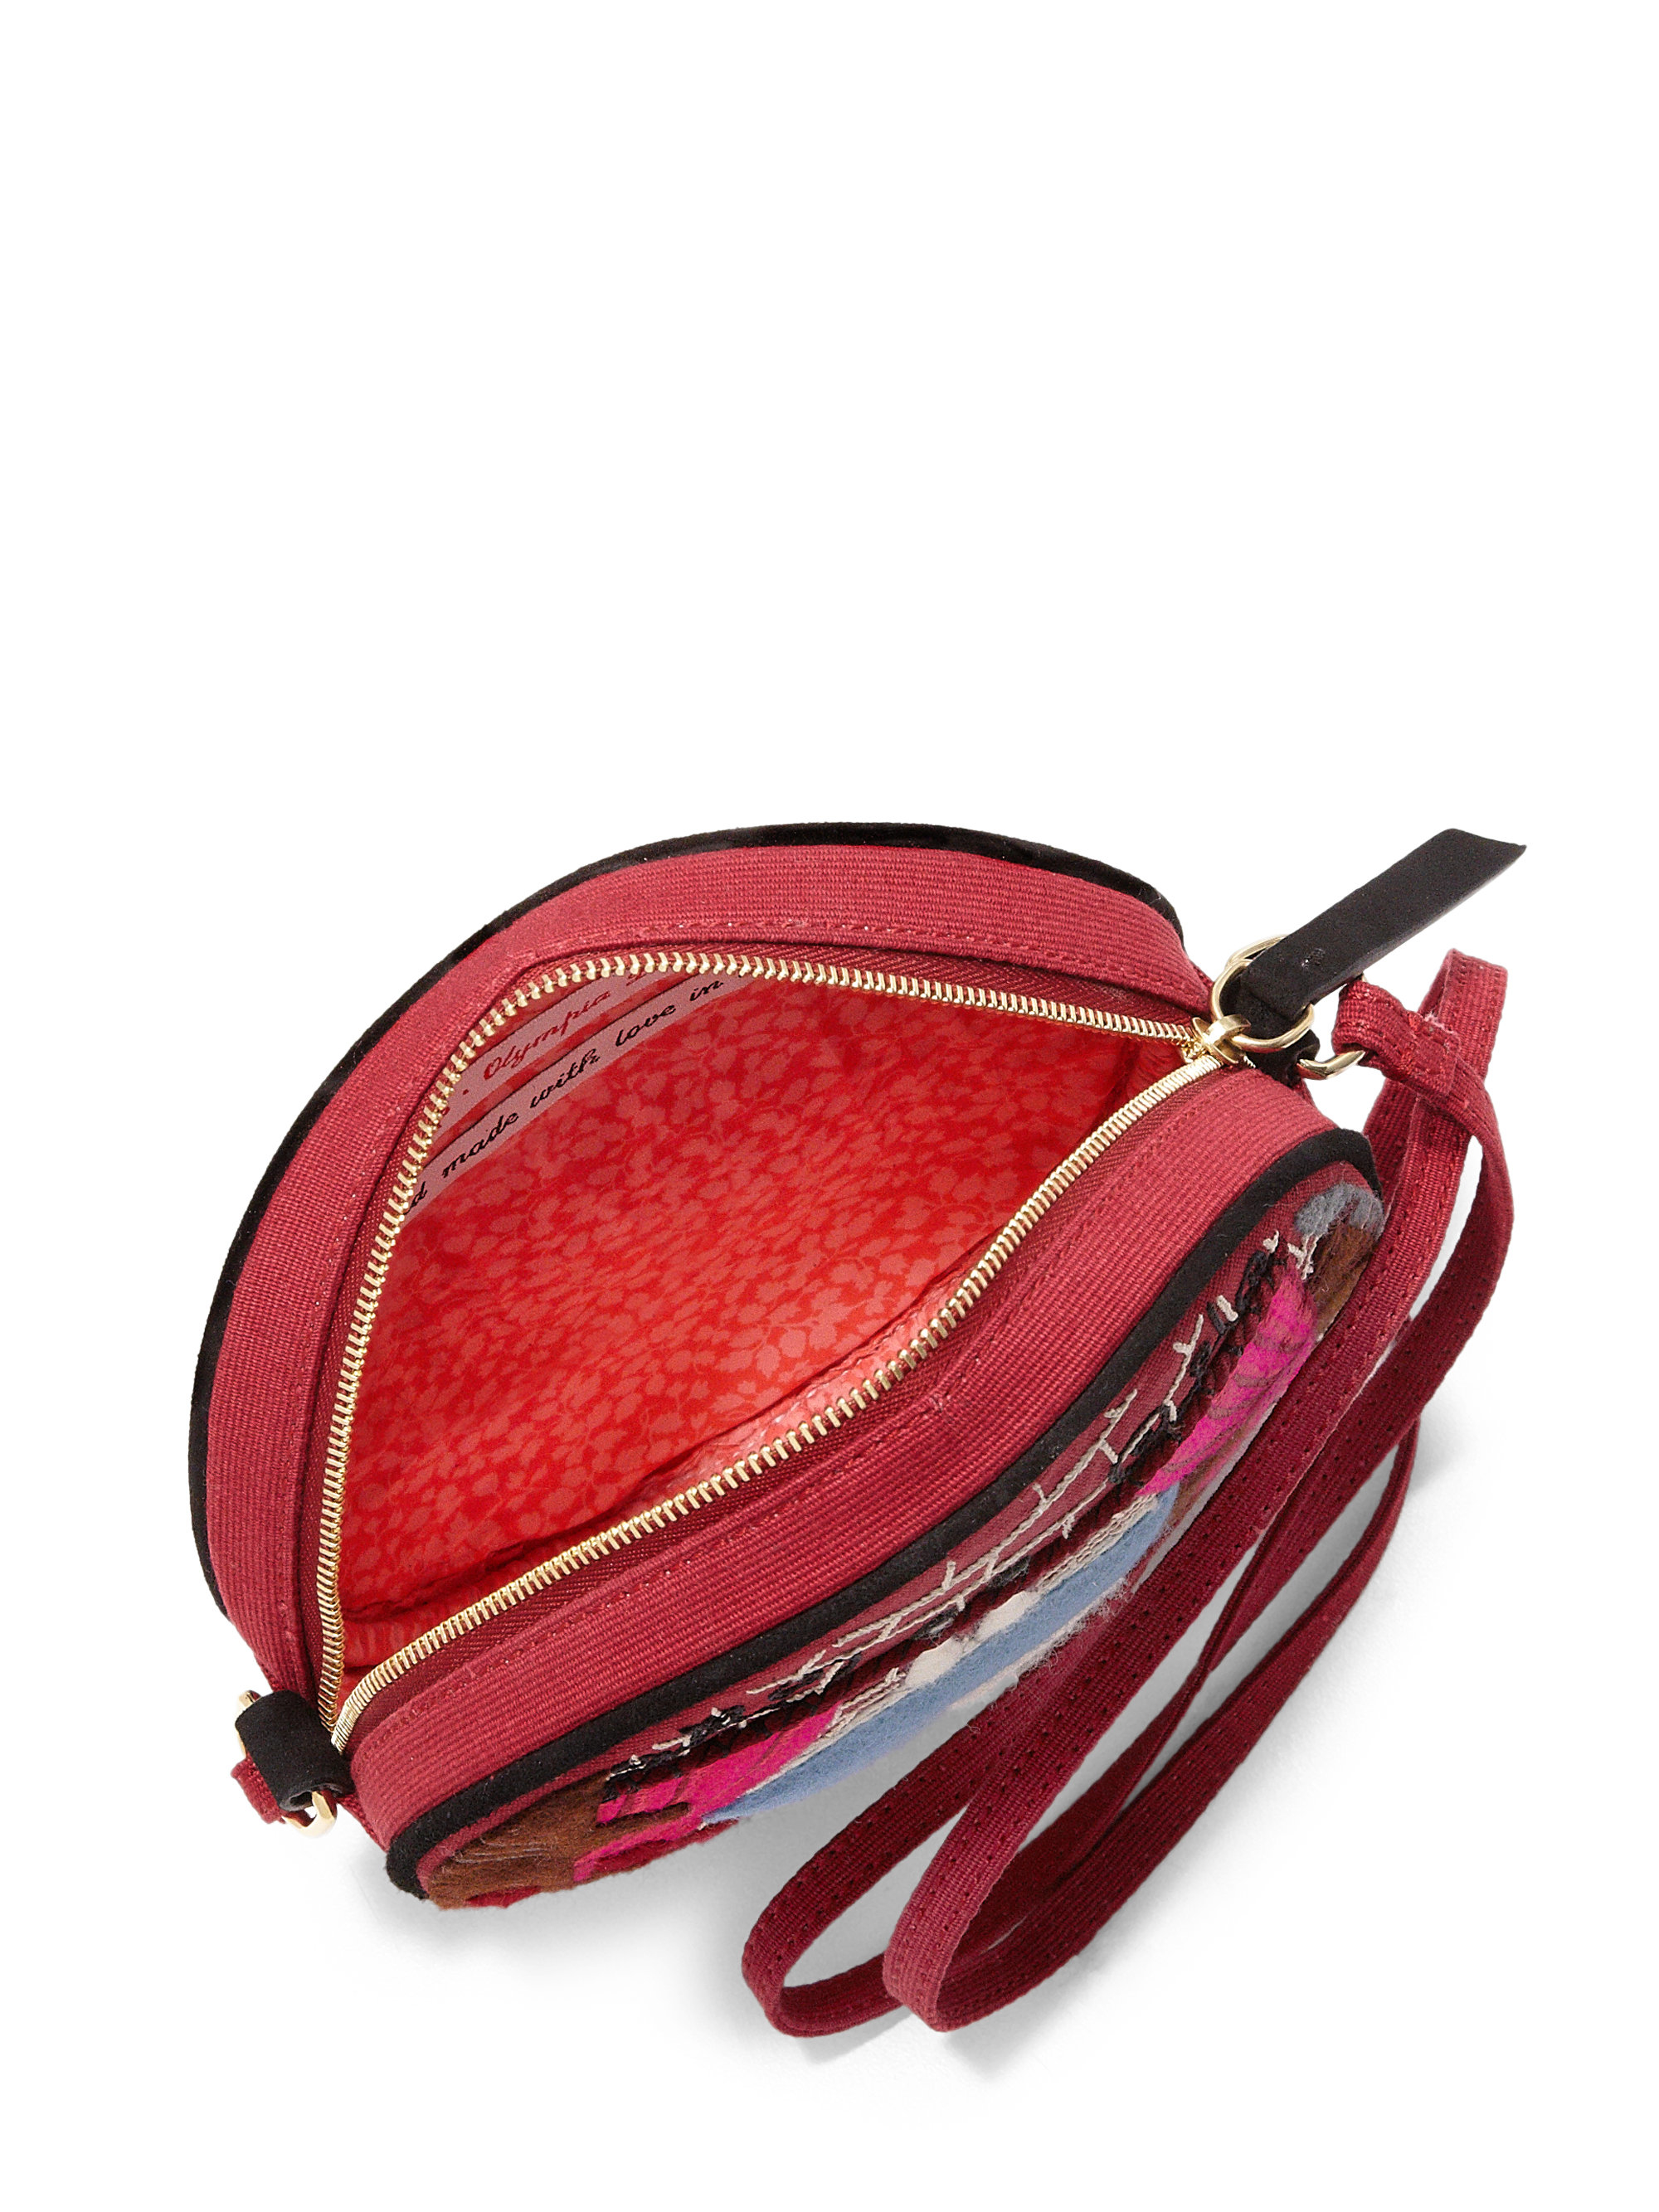 Lyst - Olympia Le-Tan Upside Down Alice Round Cross-Body Bag in Pink